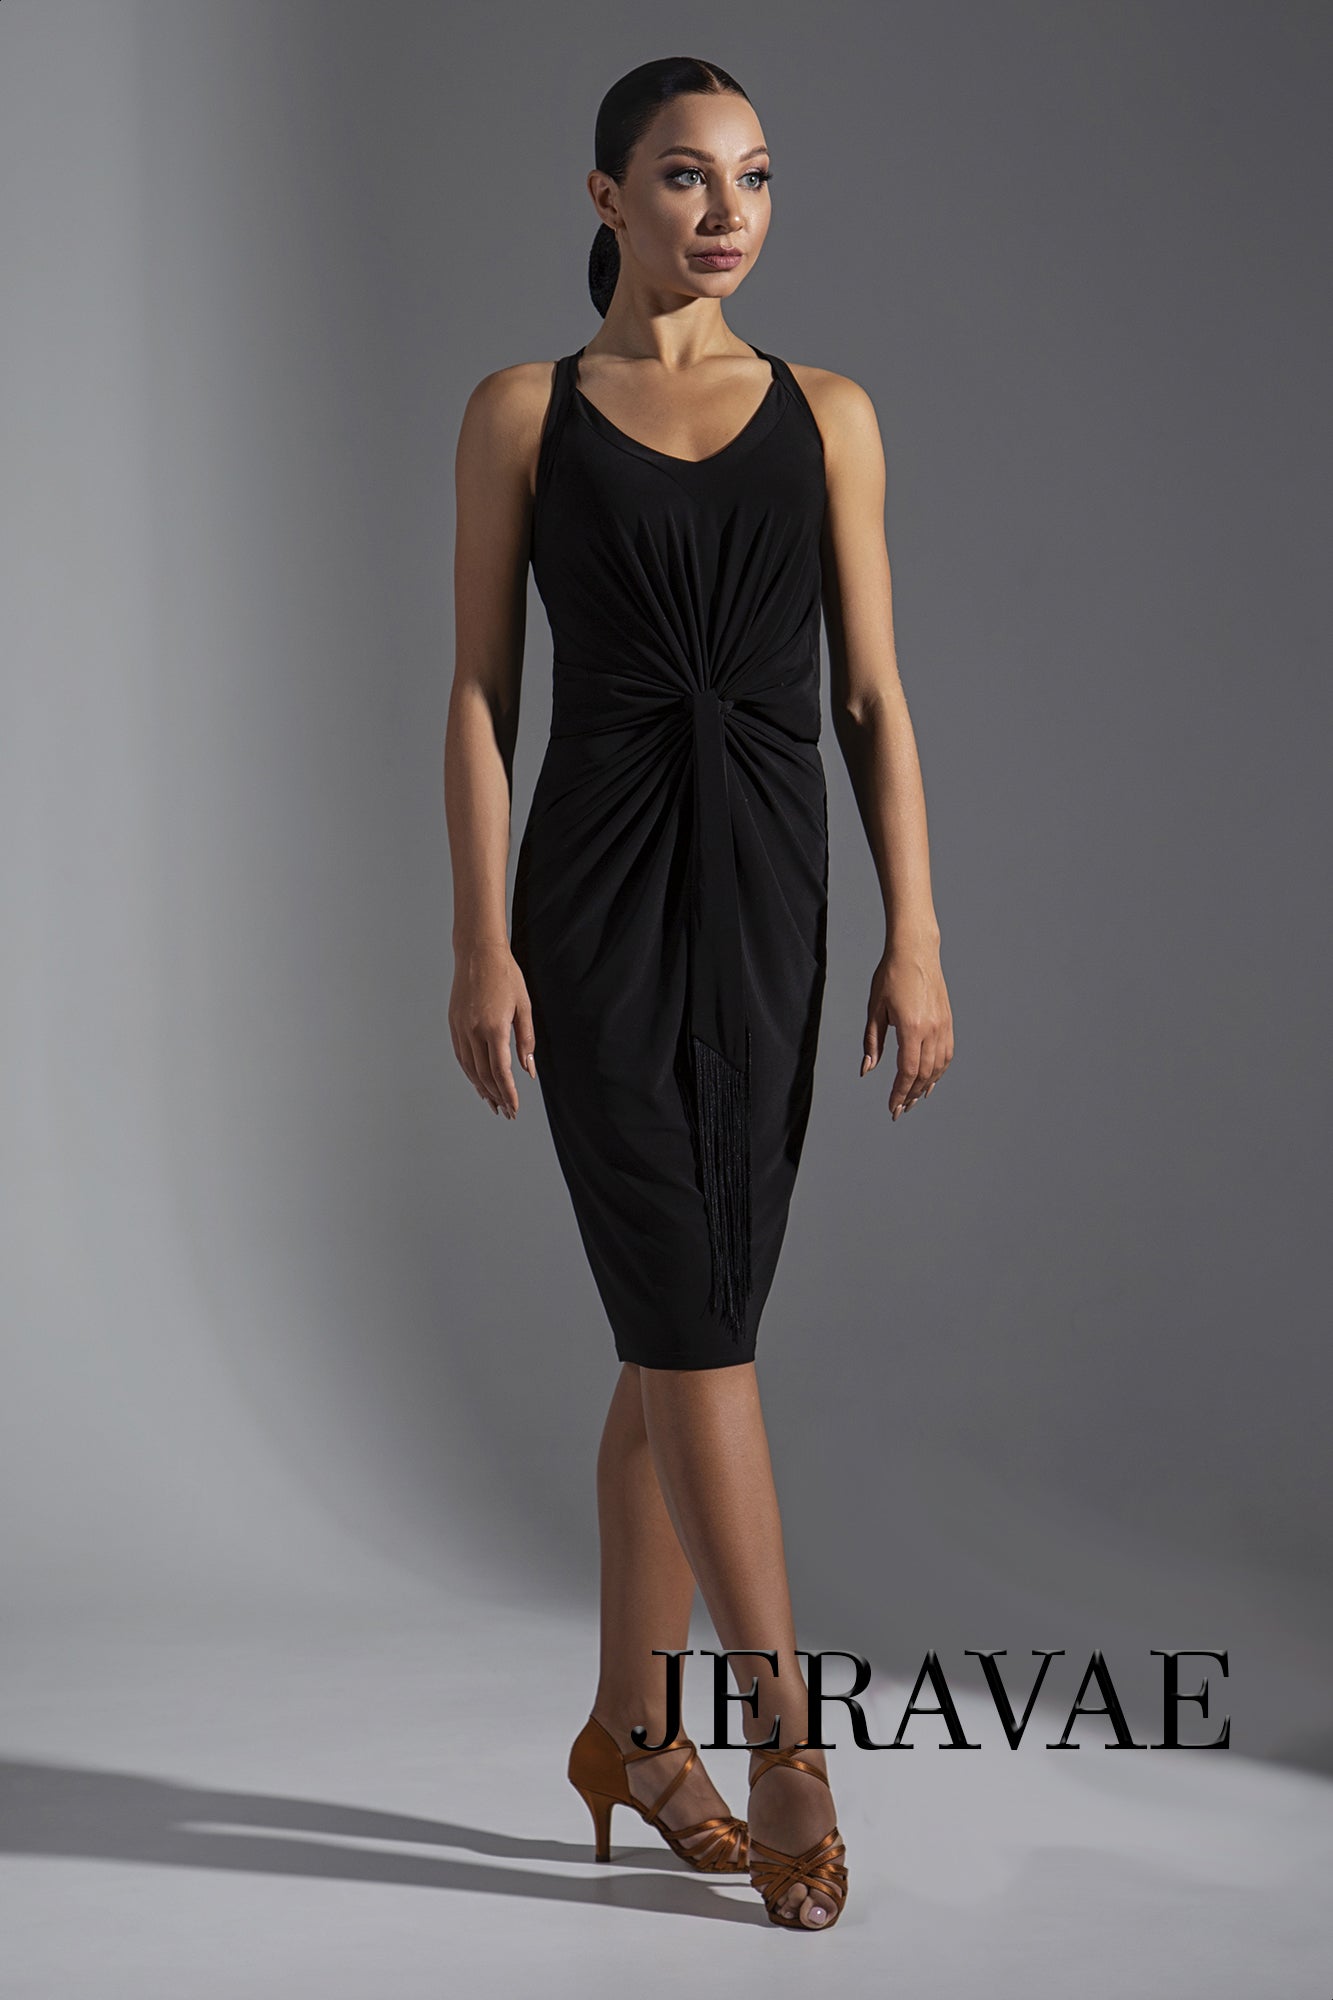 Sleeveless Latin Practice Dress with Gathered Waist Detail, Fringe Sash, and Knee-Length Skirt with Slit in Back Available in Multiple Colors PRA 648